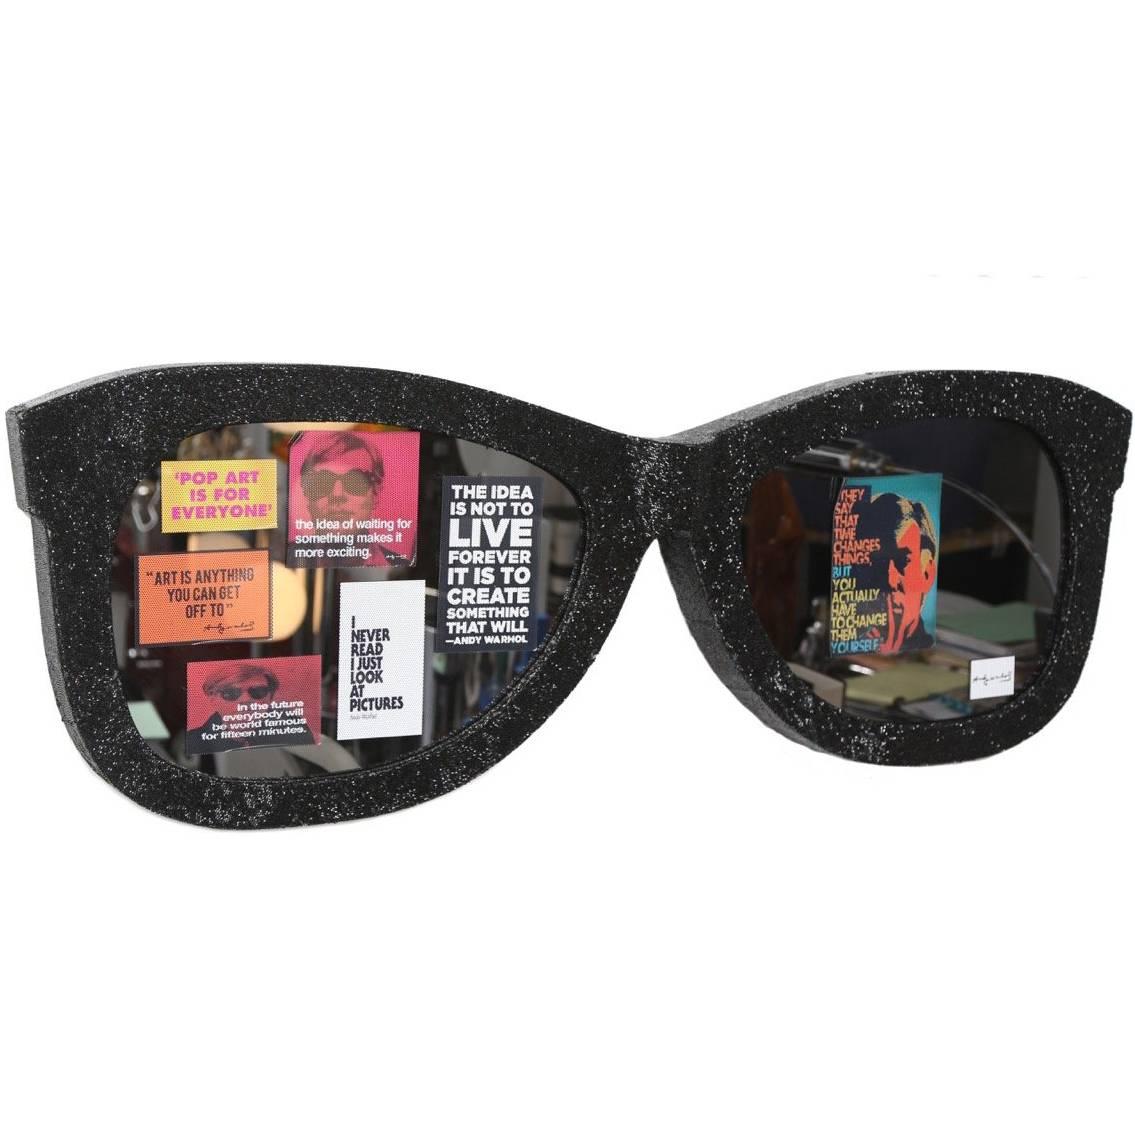 Andy Warhol Tribute Pop Art Wall Sculpture of Giant Black Crystal Sunglasses